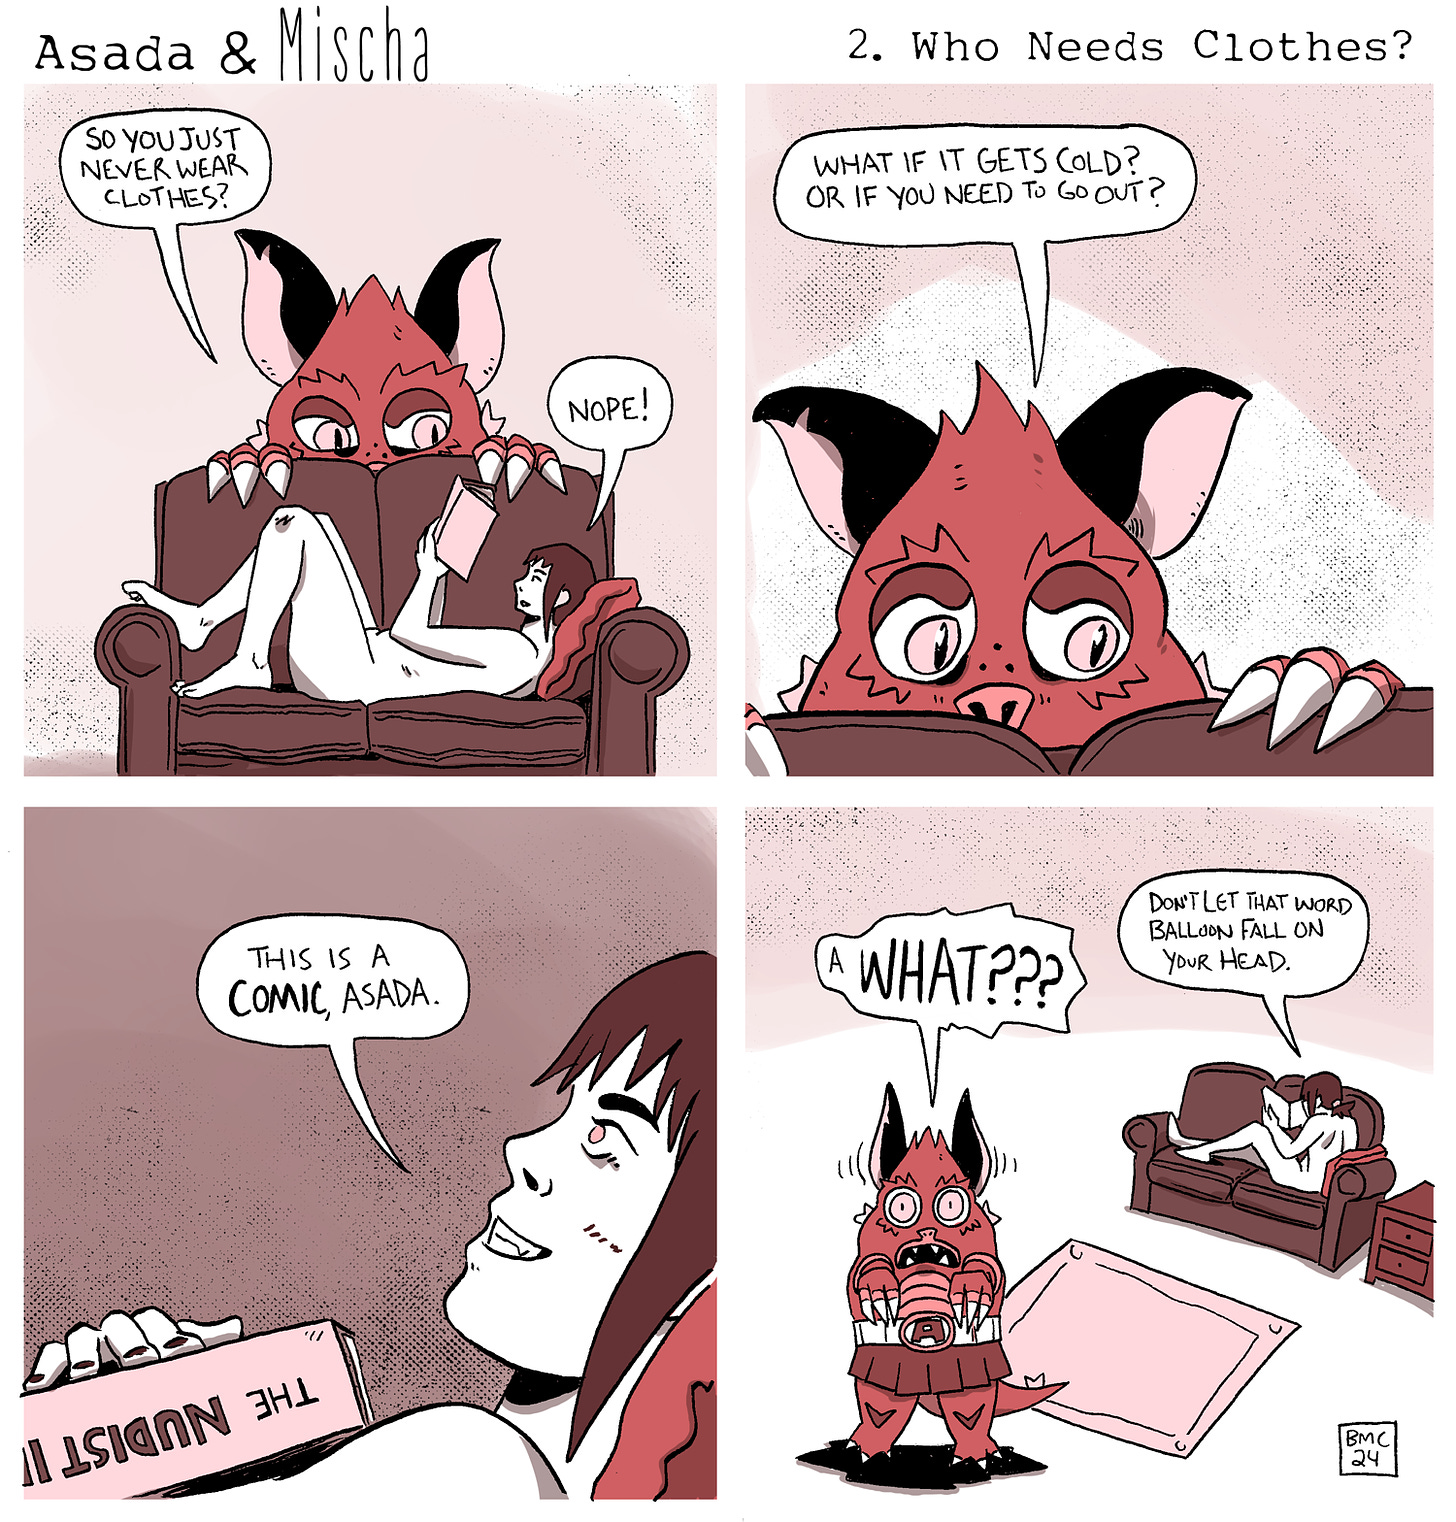 Asada & Mischa 2: Who Needs Clothes? By Brett Marcus Cook. Panel 1: Asada asks "So you just never wear clothes?" Mischa answers "Nope!" Panel 2: Asada asks "What if it gets cold? Or if you need to go out?" Panel 3: Closeup on Mischa as she replies "This is a COMIC, Asada." They're holding a copy of the Nudist Idea by Cec Cinder. Panel 4: Asada looks out at the reader shouting "A WHAT???" as Mischa continues reading and says "Don't let that word balloon fall on your head."